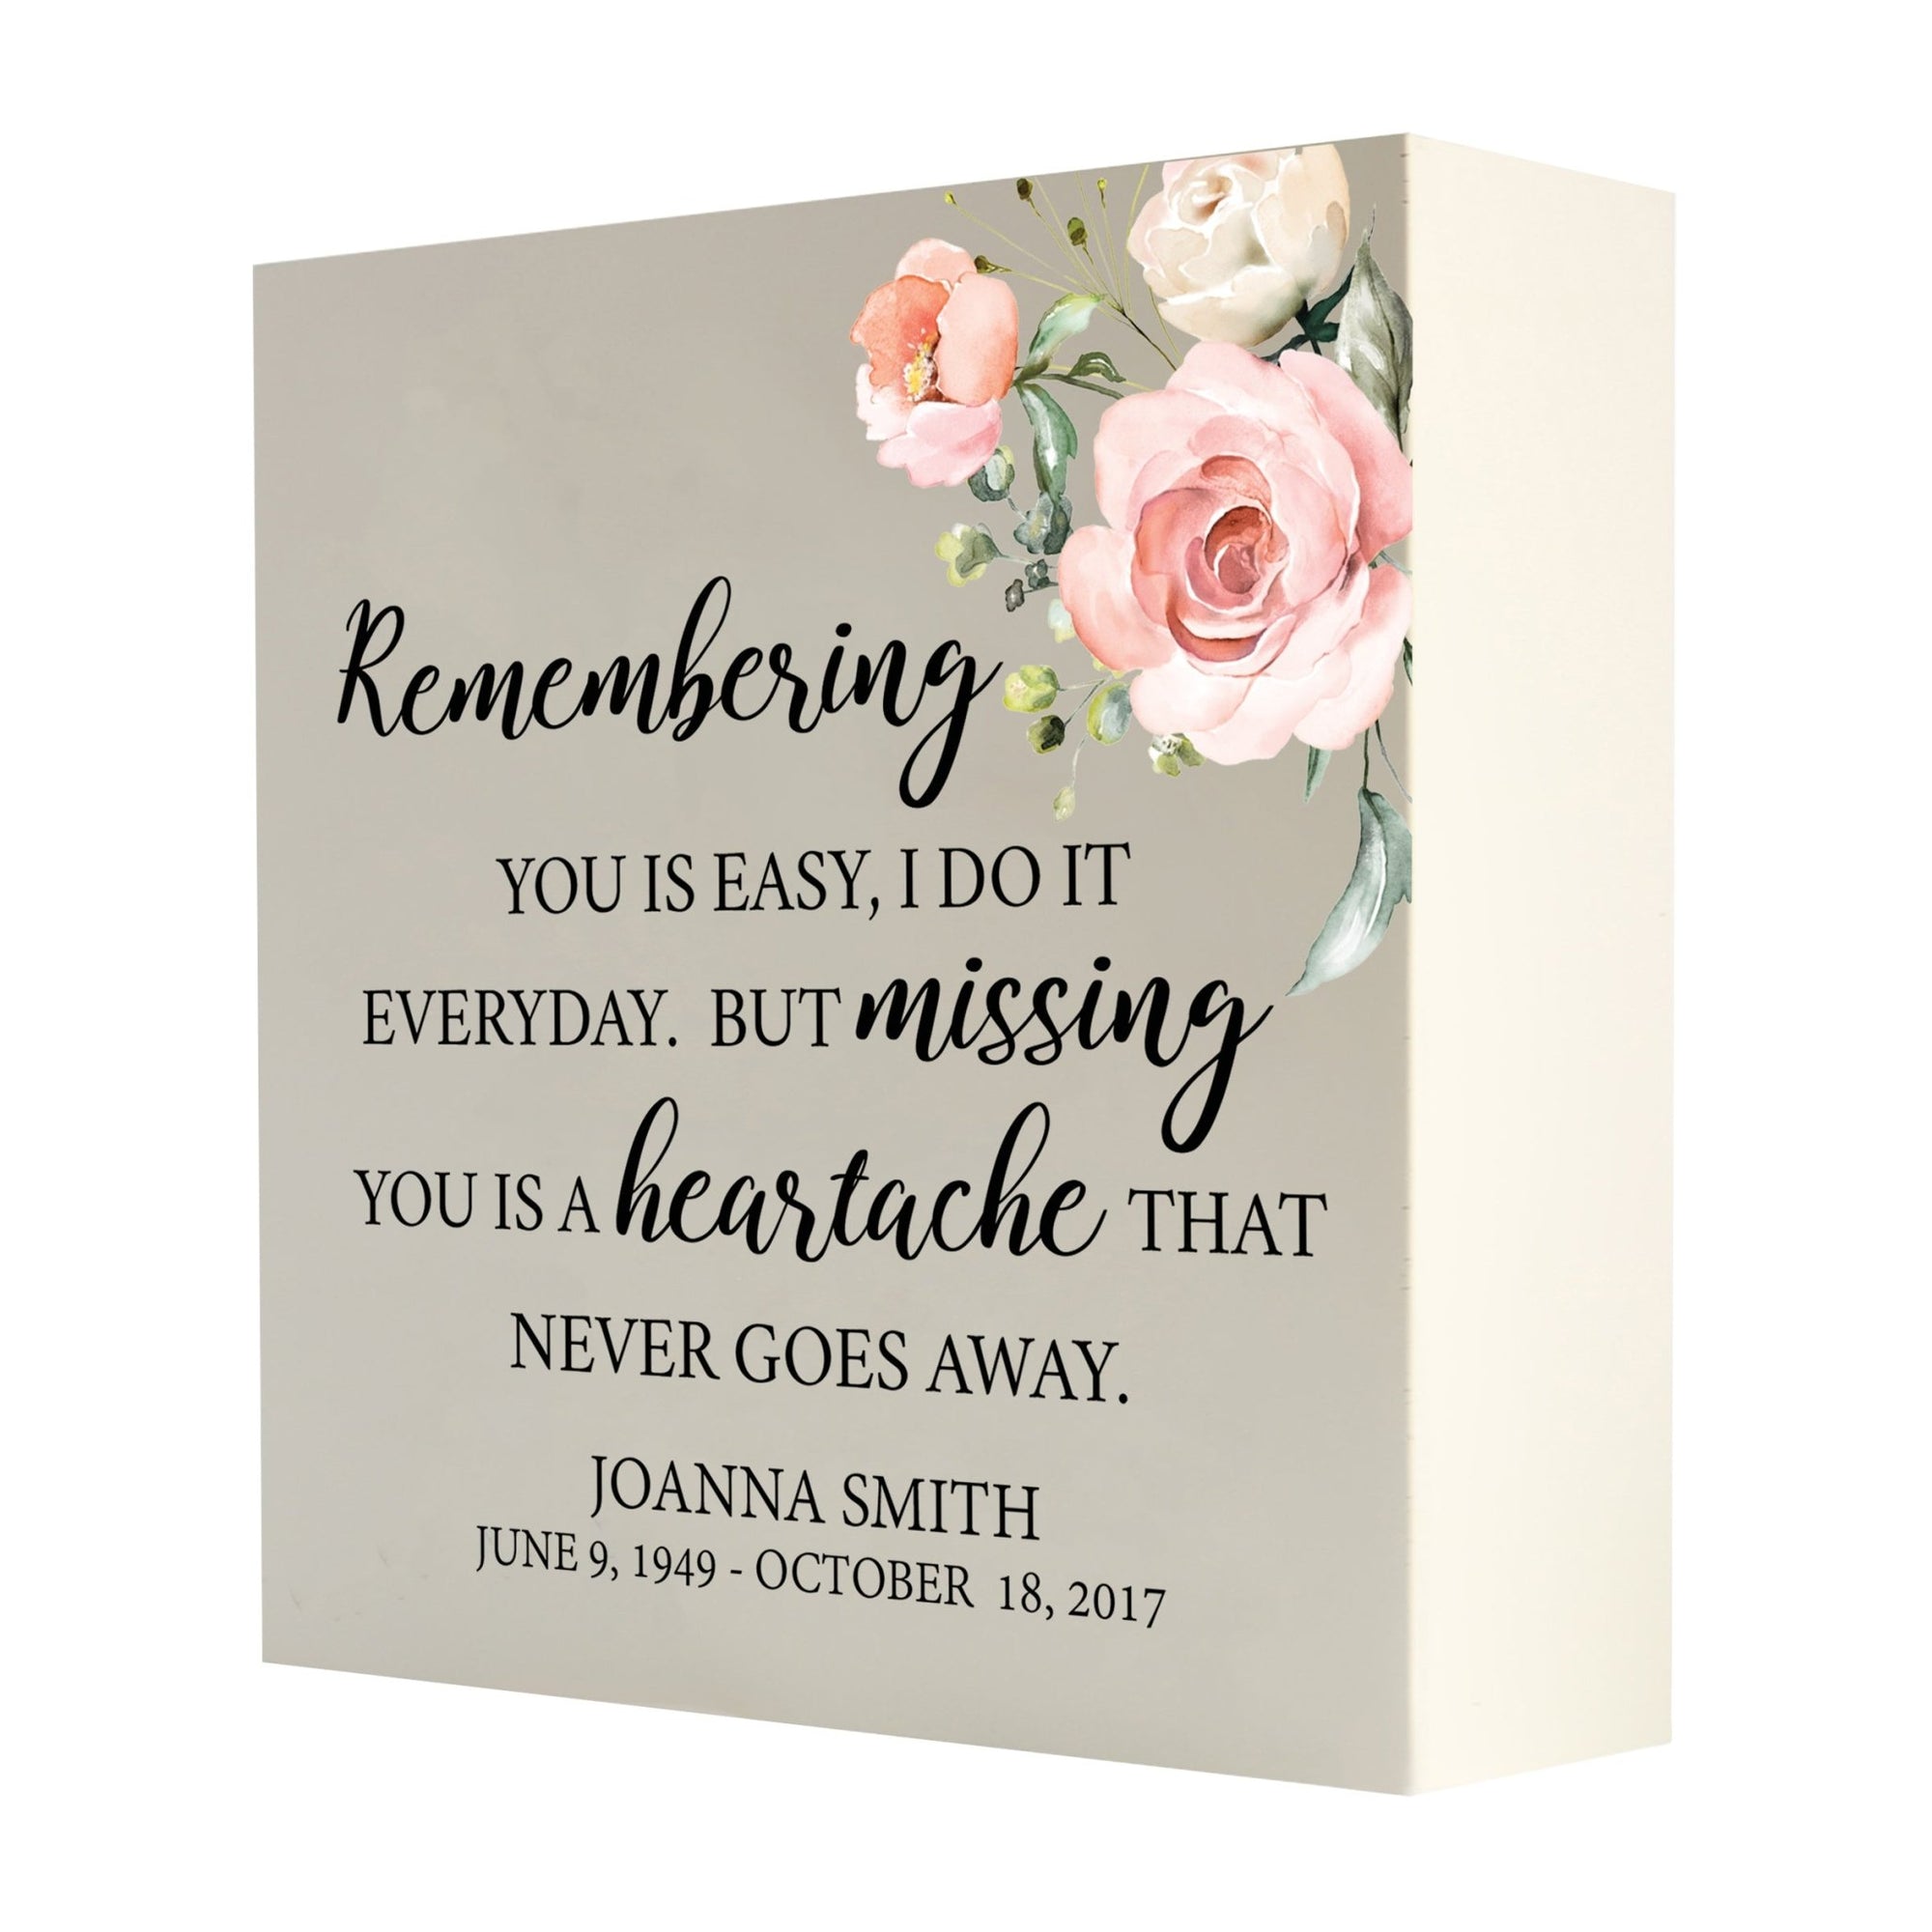 Personalized Modern Inspirational Memorial Wooden Shadow Box and Urn 10x10 holds 189 cu in of Human Ashes - Remembering You Is Easy (Missing) - LifeSong Milestones